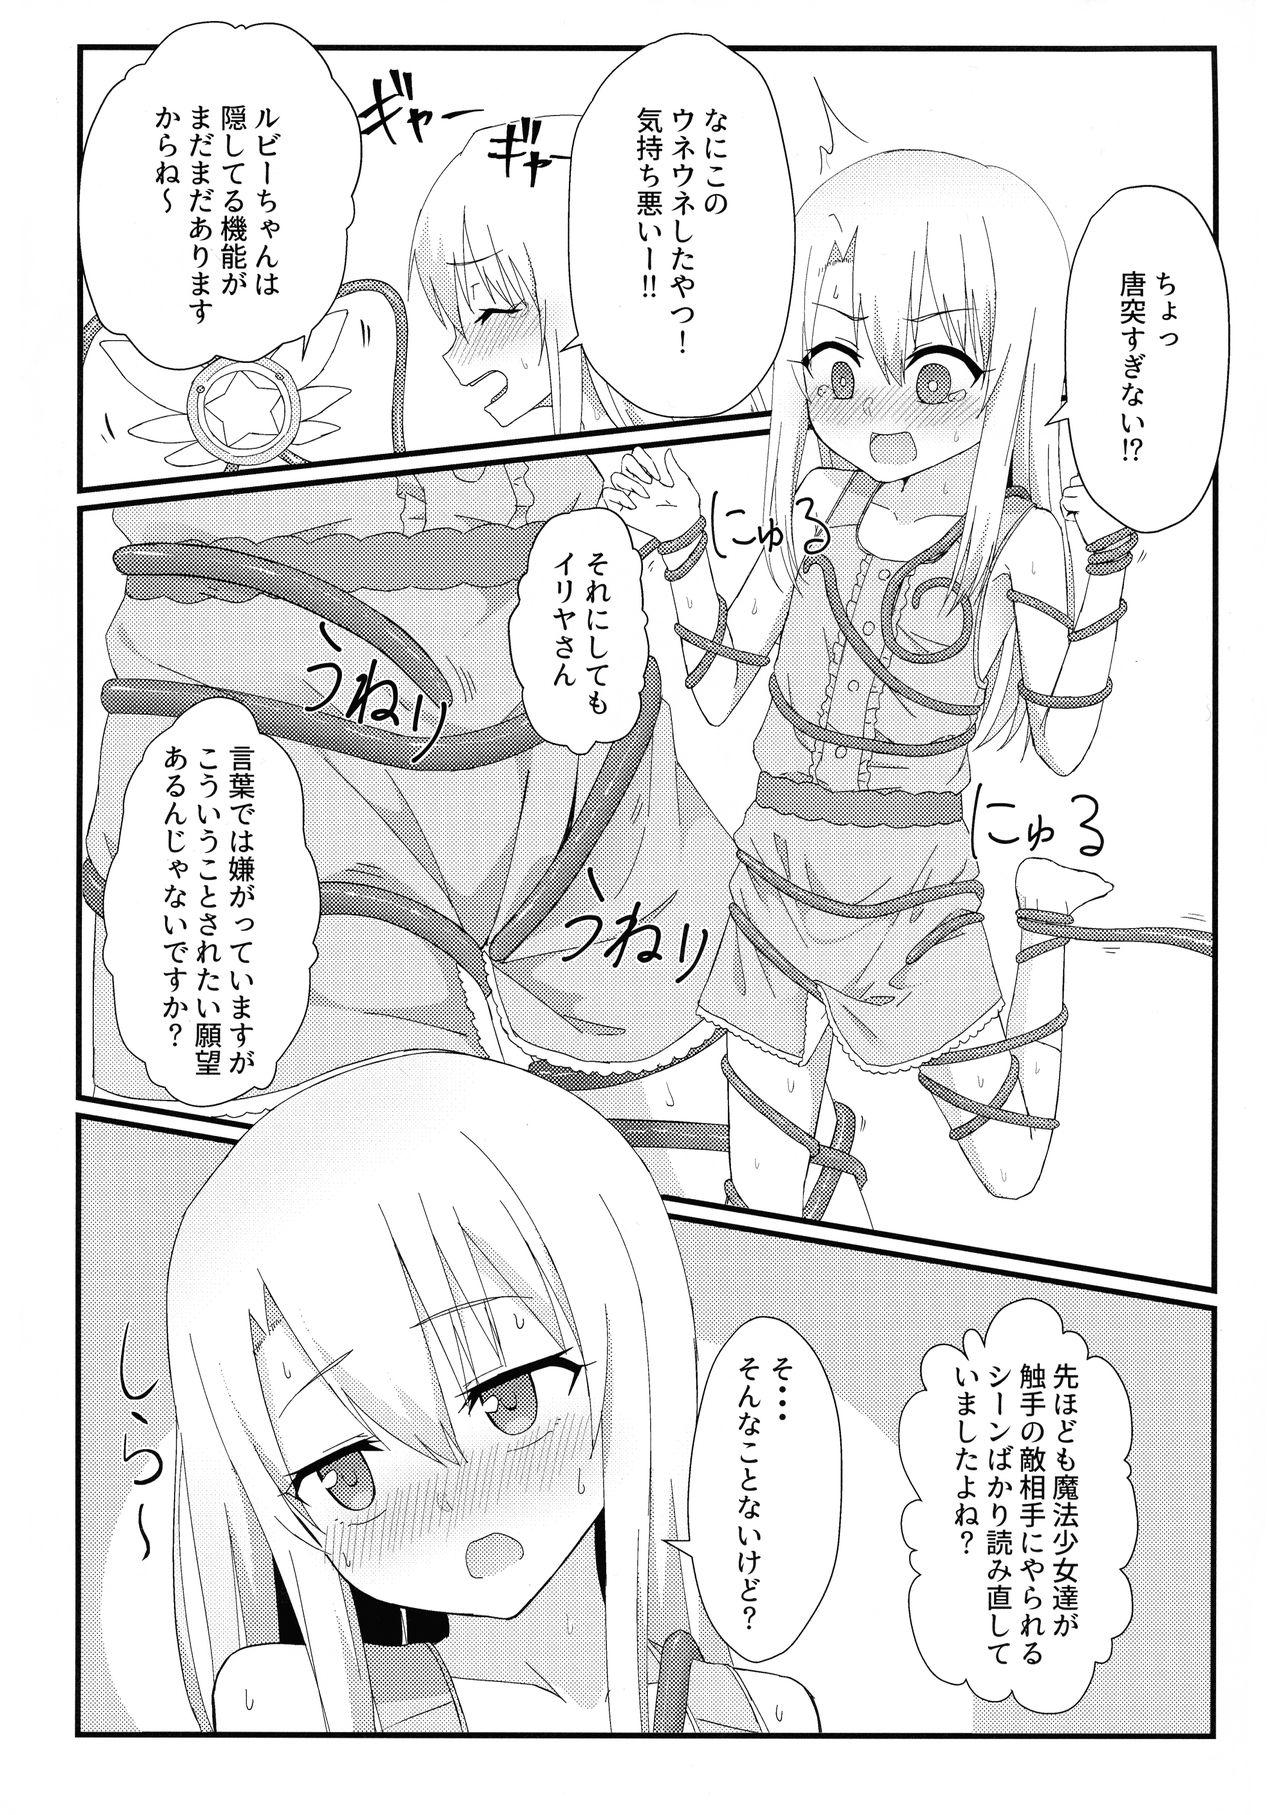 Wives Illya to Ruby Etchi Etchi Secret Function - Fate kaleid liner prisma illya Pegging - Page 4